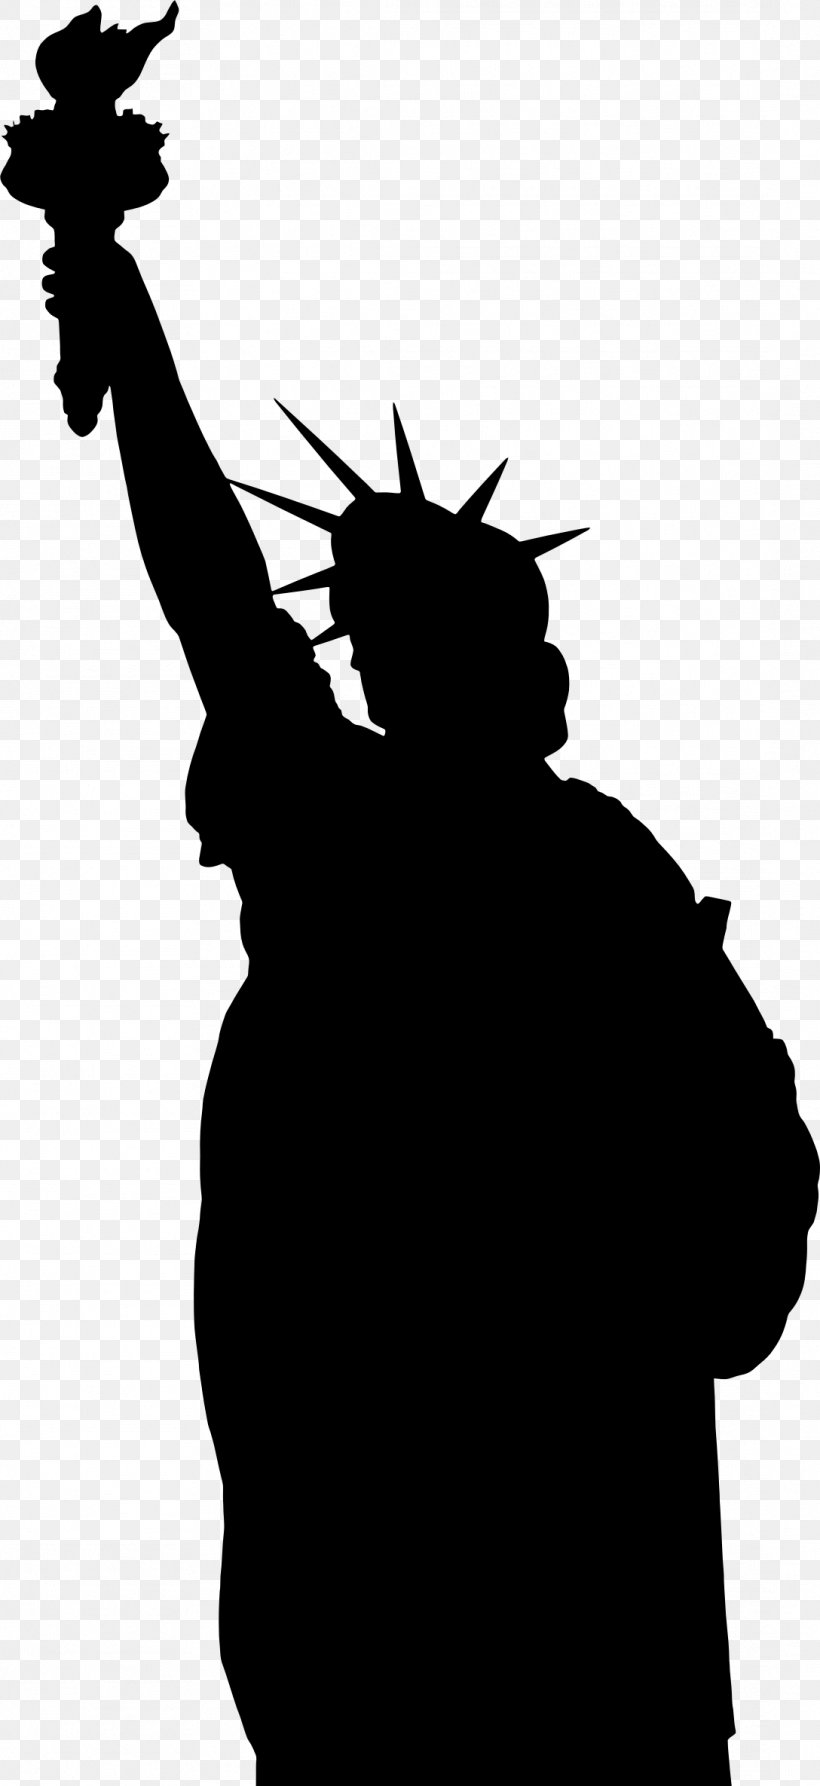 Statue Of Liberty Silhouette Clip Art, PNG, 1088x2370px, Statue Of Liberty, Art, Black And White, Fictional Character, Liberty Island Download Free